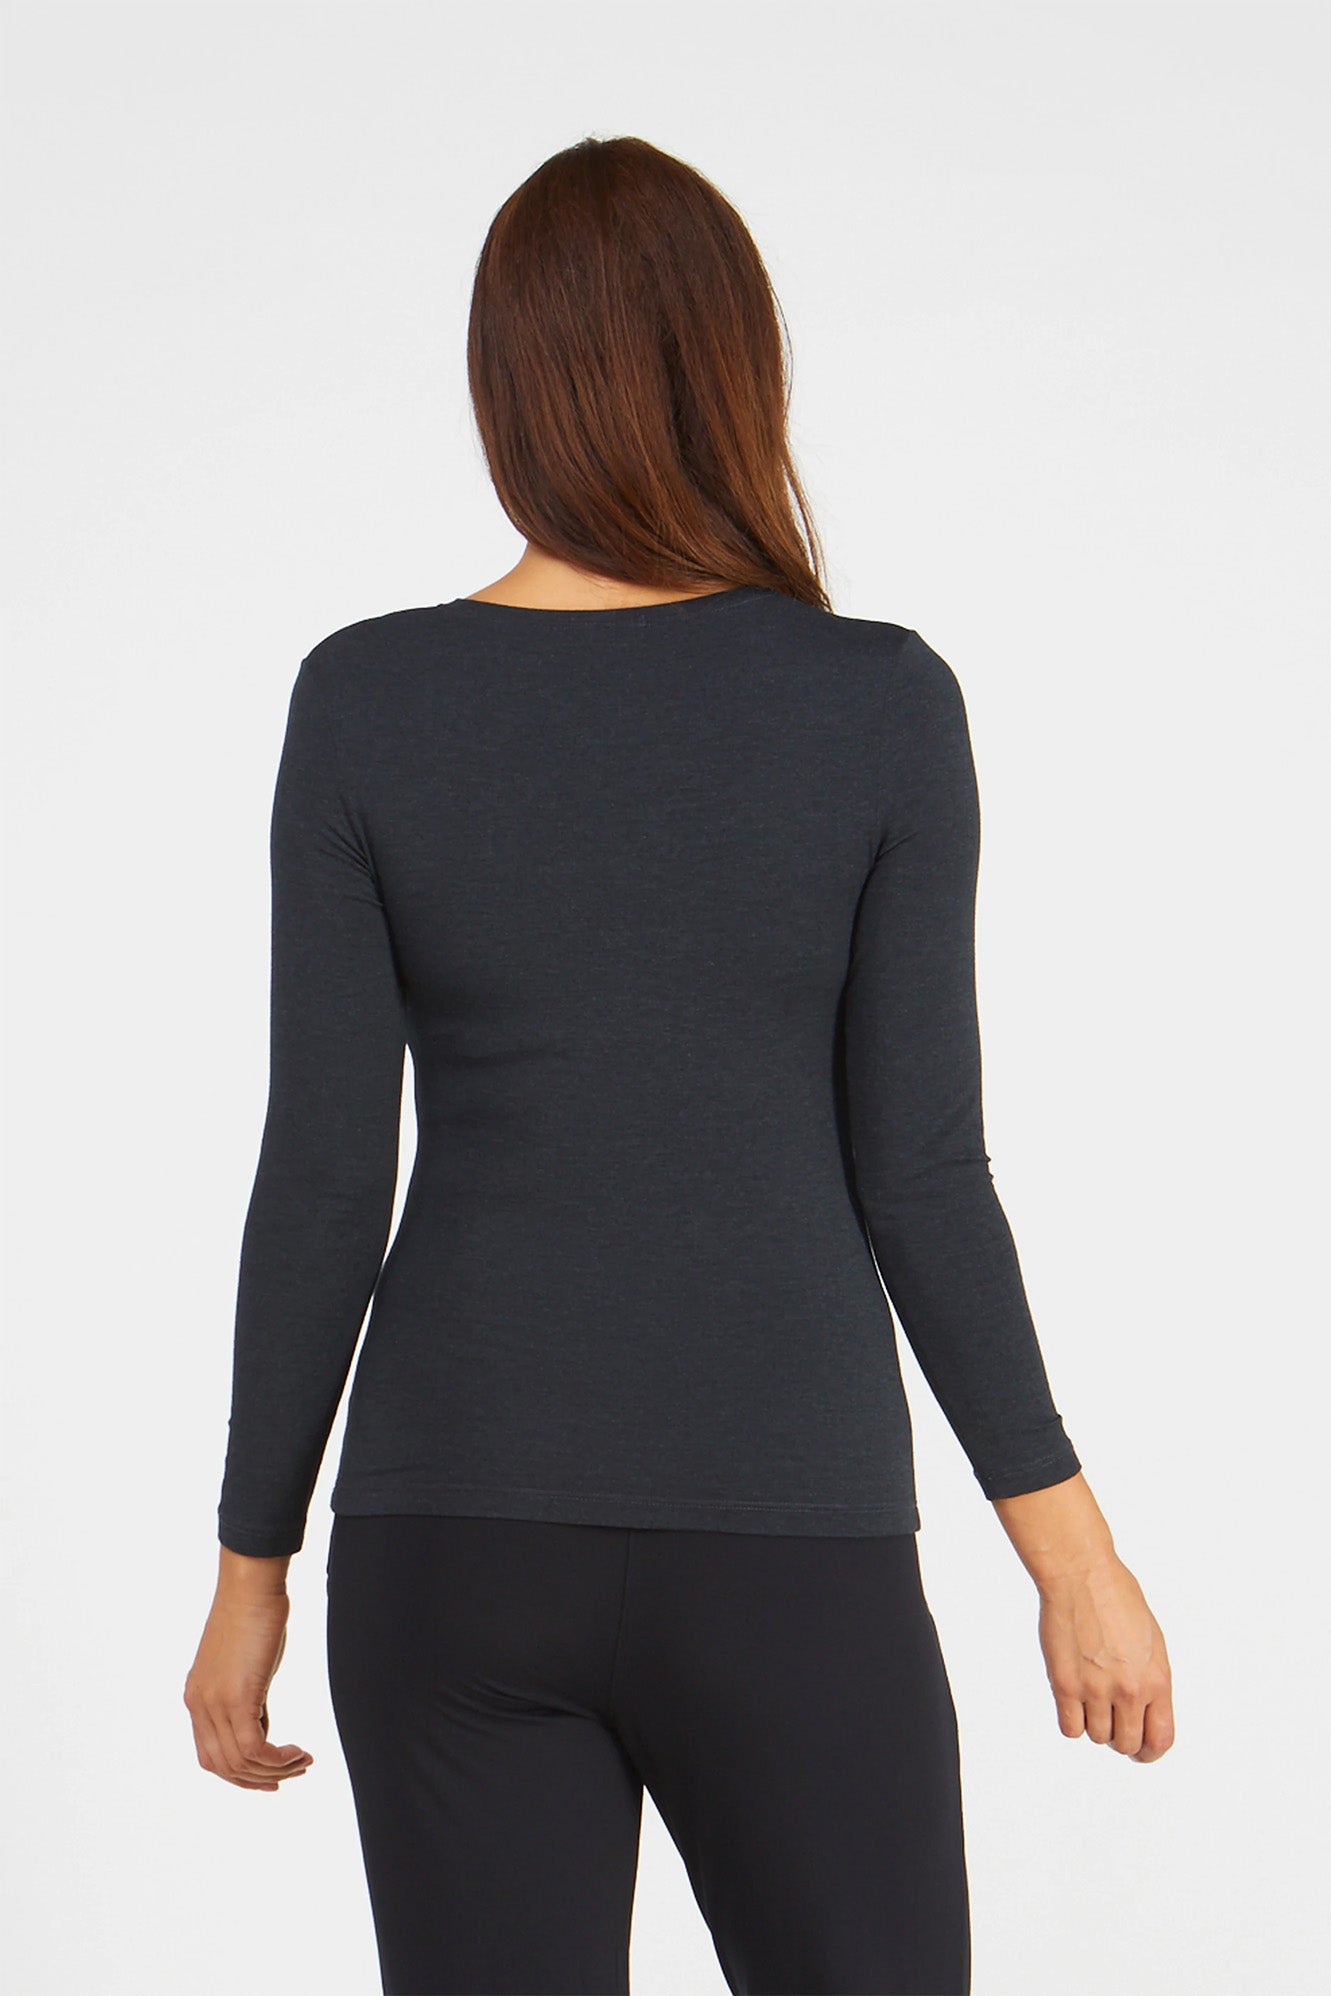 Woman wearing Tani 79276 High Neck Long Sleeve in graphite back view